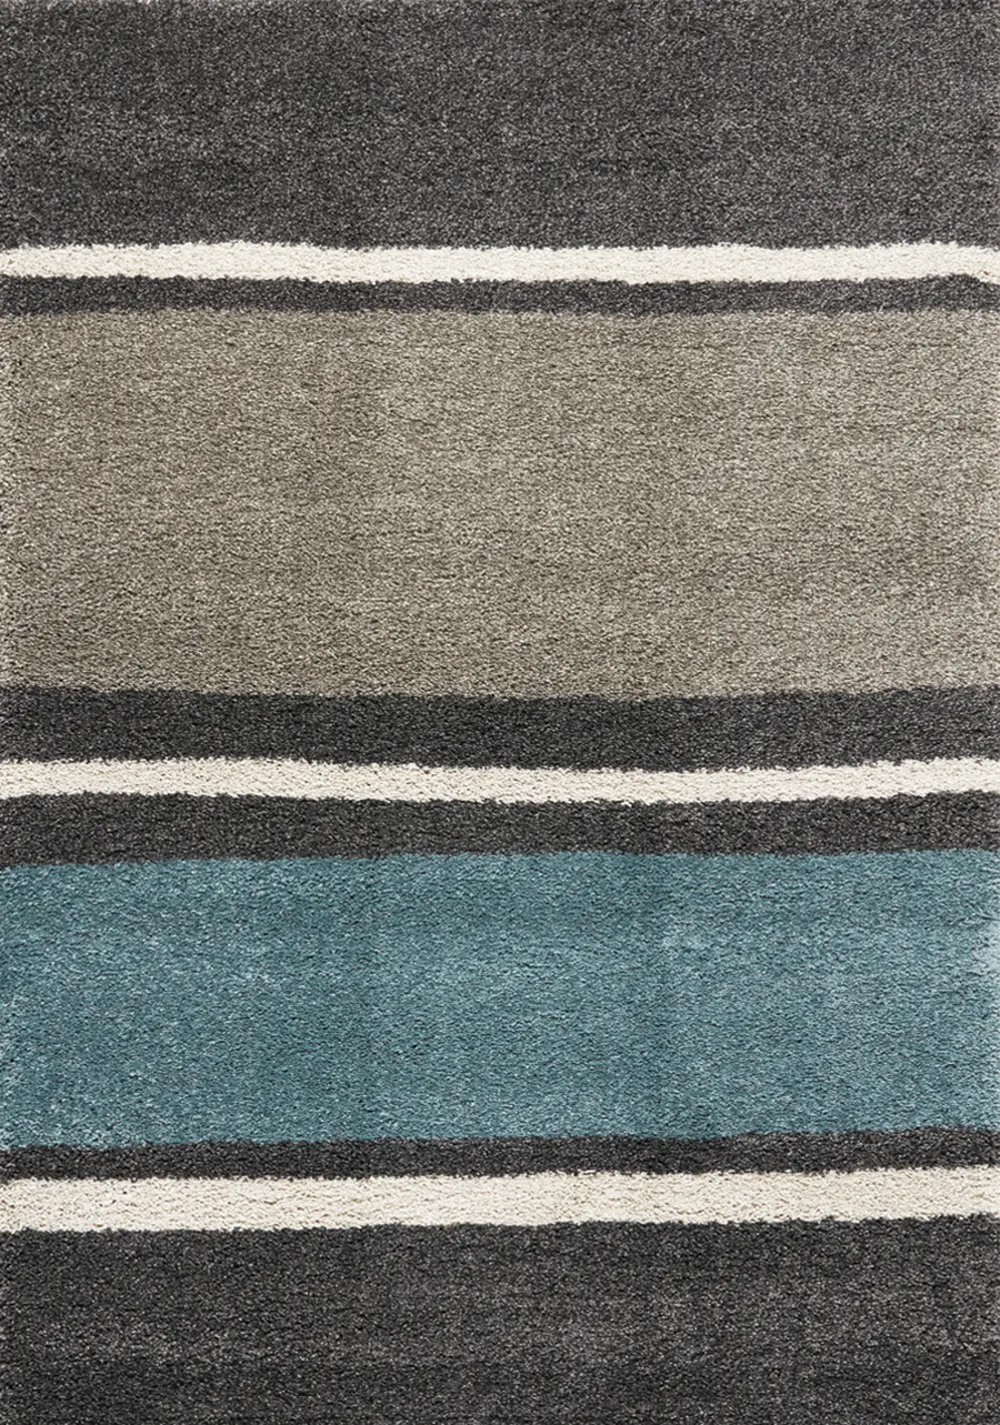 2 x 4 X-Small Striped Gray, Taupe and Teal Blue Rug - Maroq-1